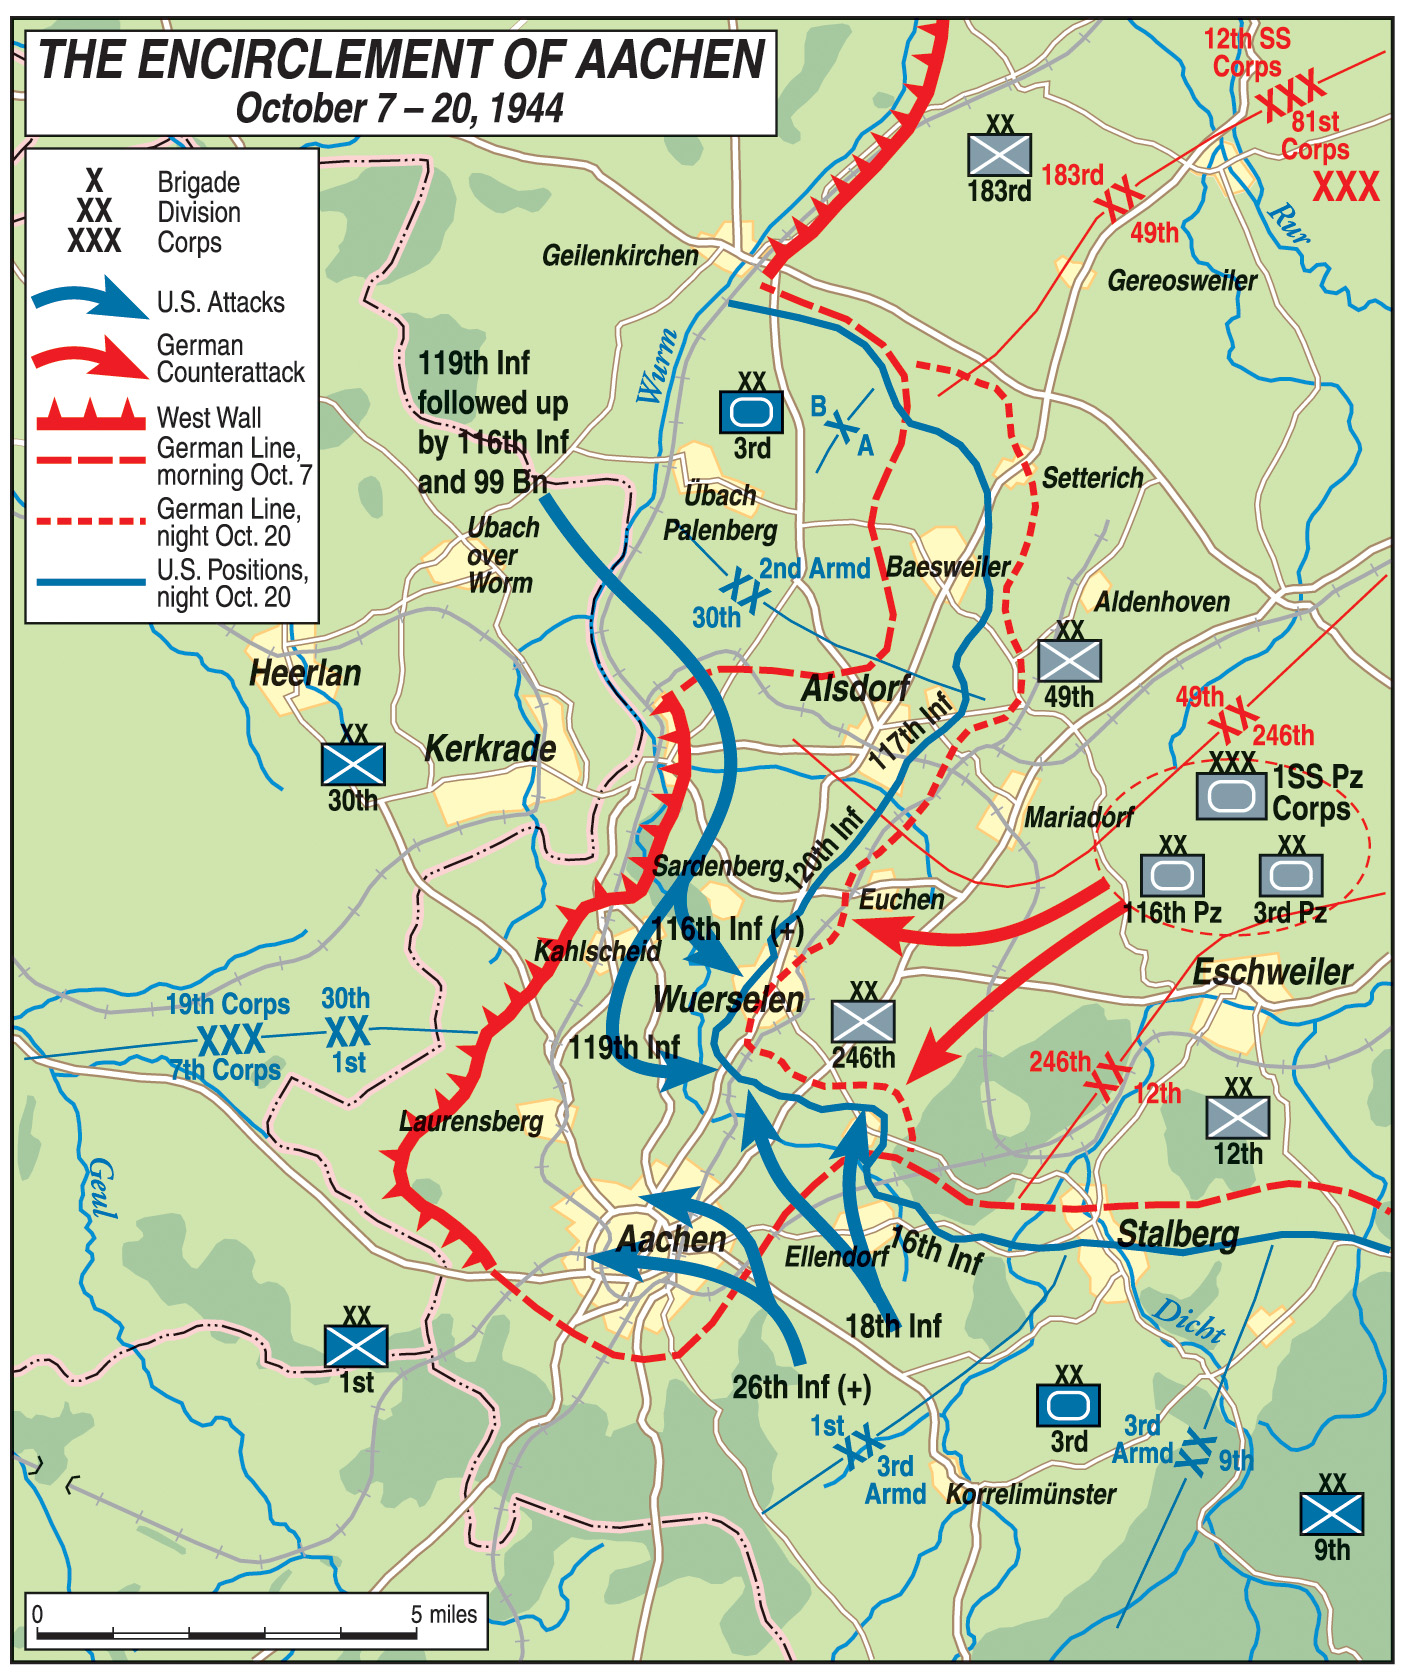 The Americans had hoped initially to bypass Aachen but ultimately found themselves bogged down in an urban battle. The U.S. 1st and 30th Infantry Divisions suffered heavy casualties that prevented them from participating in the subsequent advance to the Rhine 50 miles to the east. 